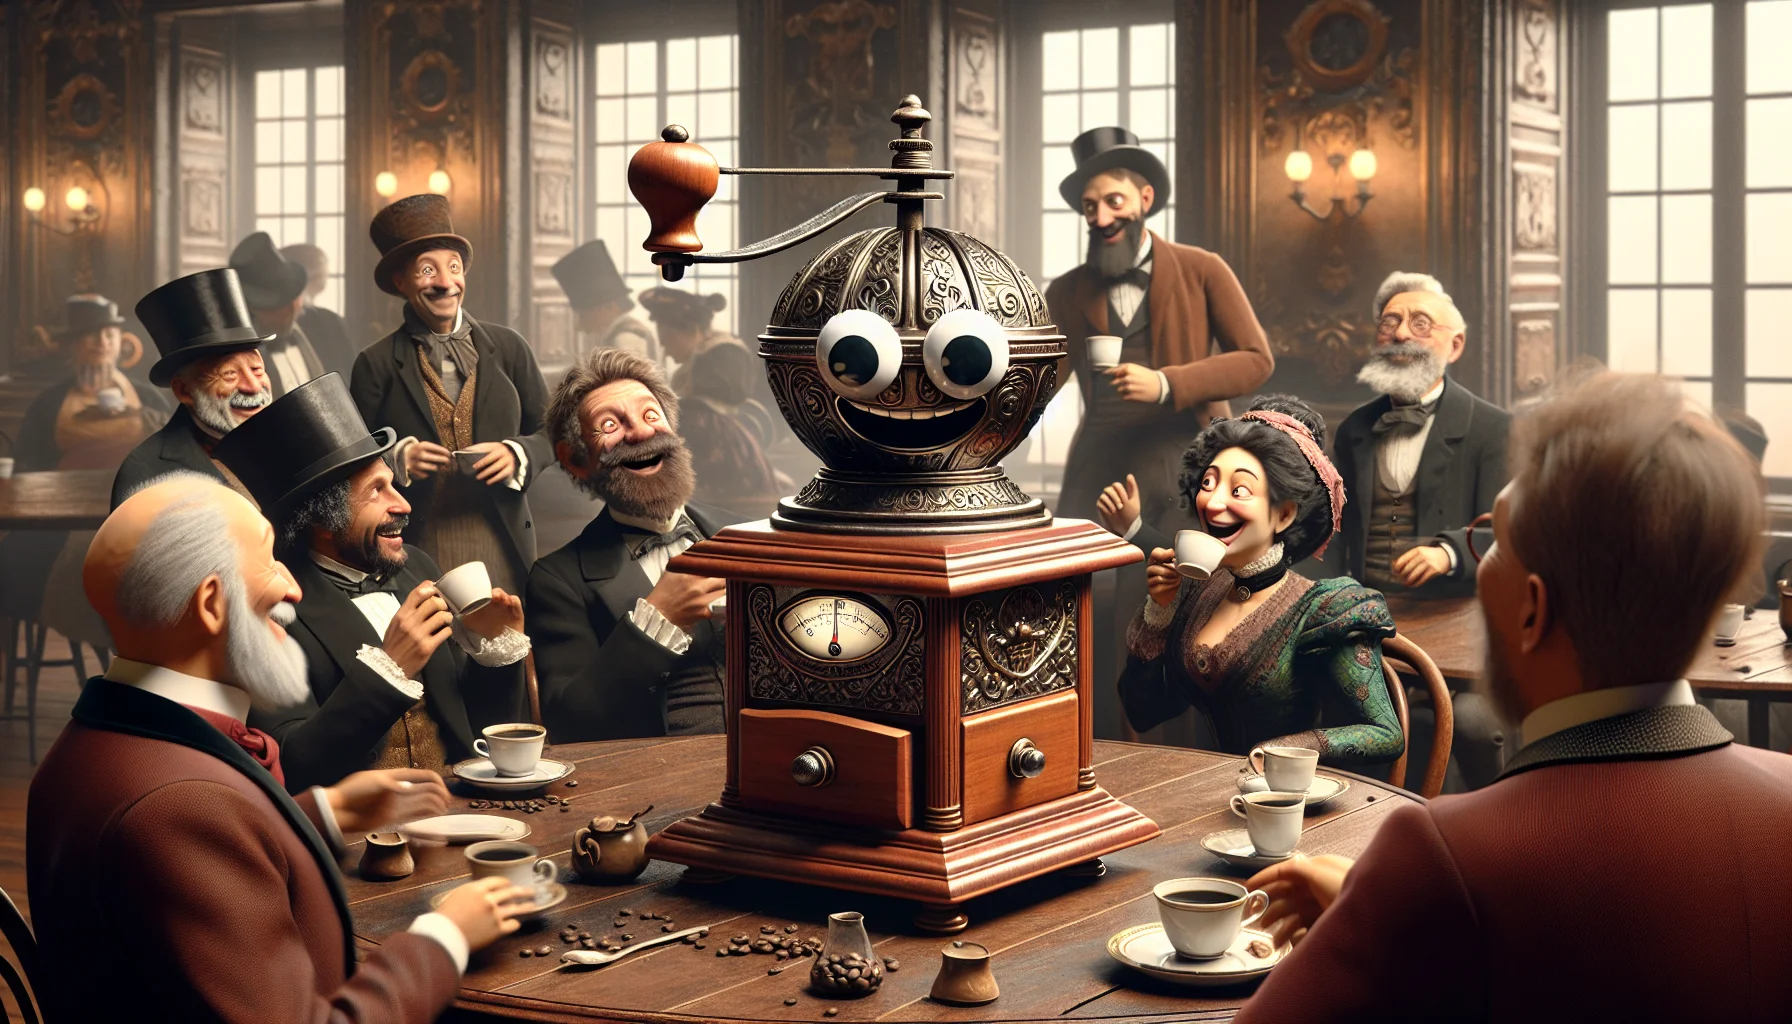 Create a detailed, realistic image set in a bustling 19th-century cafe. In the center of the scene, a large, ornately-decorated, antique coffee grinder stands propped up on an elegant wooden table. It has a whimsical, exaggerated smile on its face, cartoon-like googly eyes stuck haphazardly on its top, and its crank handle is spinning energetic circles as if self-operating. Around it, men and women of diverse descents, (Caucasian, Hispanic, Black and Middle-Eastern) all dressed in traditional period attire, share amused glances, laughing and pointing towards the affable apparatus while savoring their delicious cups of coffee.